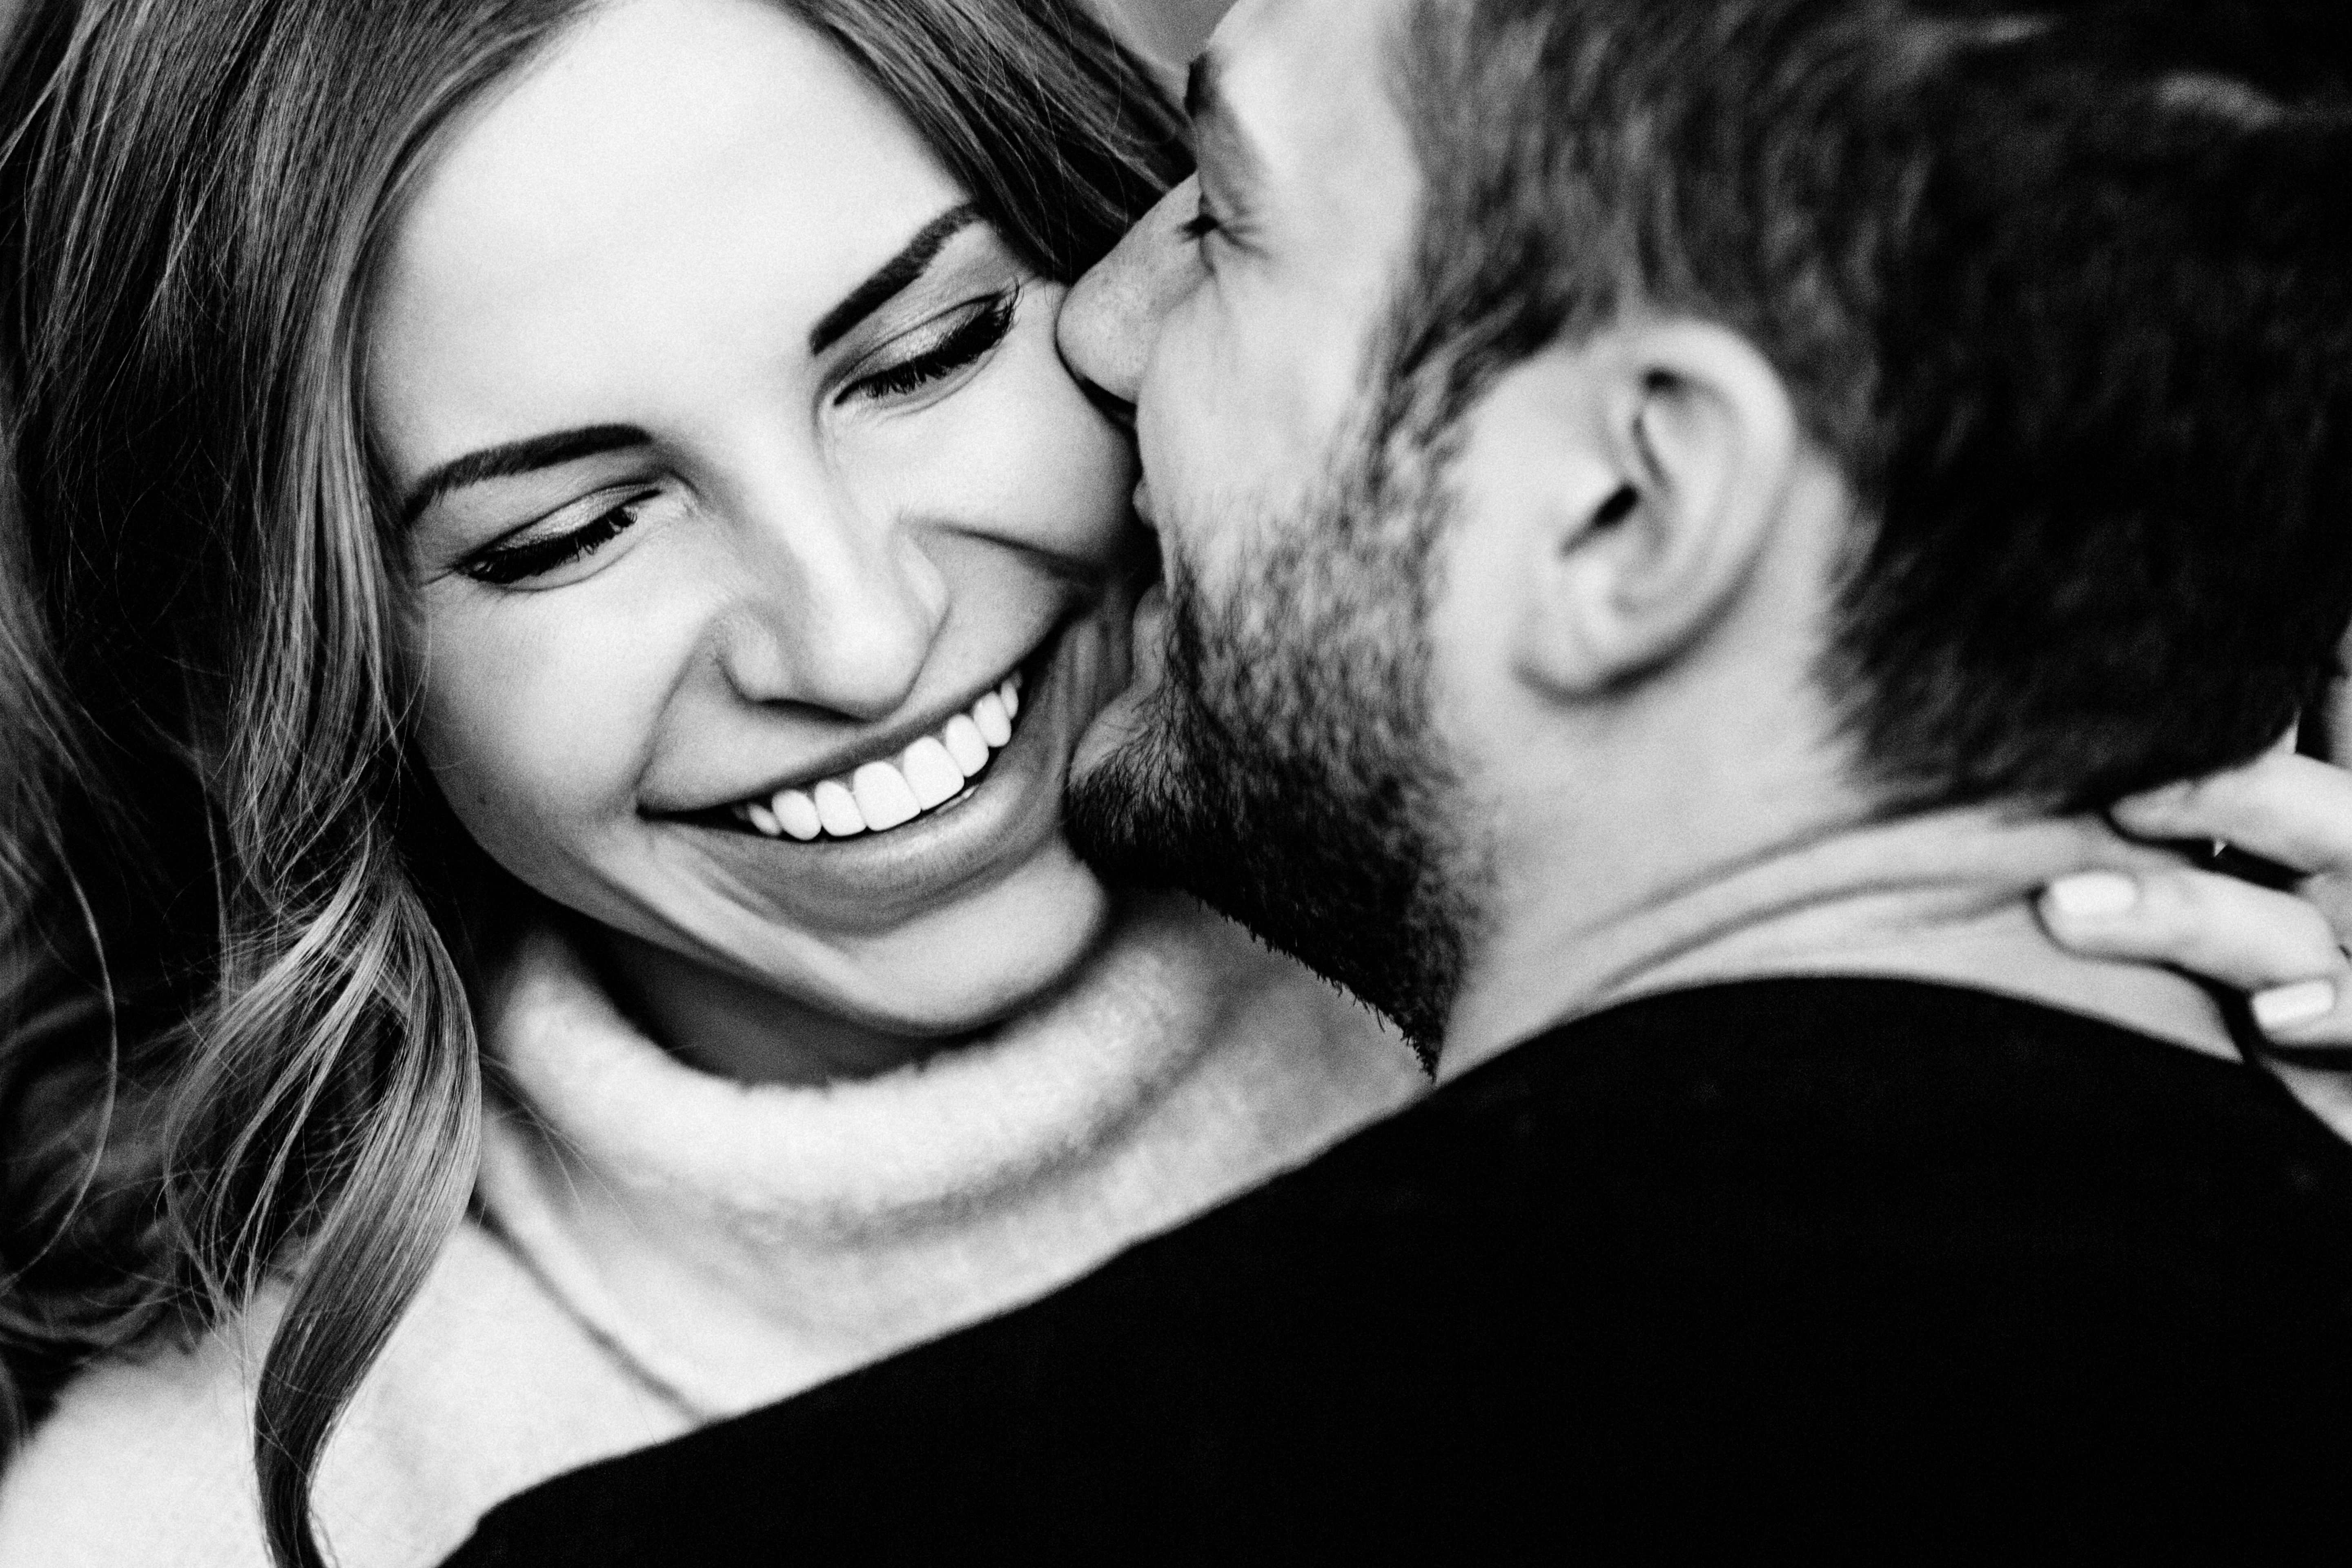 A close-up of a couple smiling playfully in an embrace | Source: Shutterstock